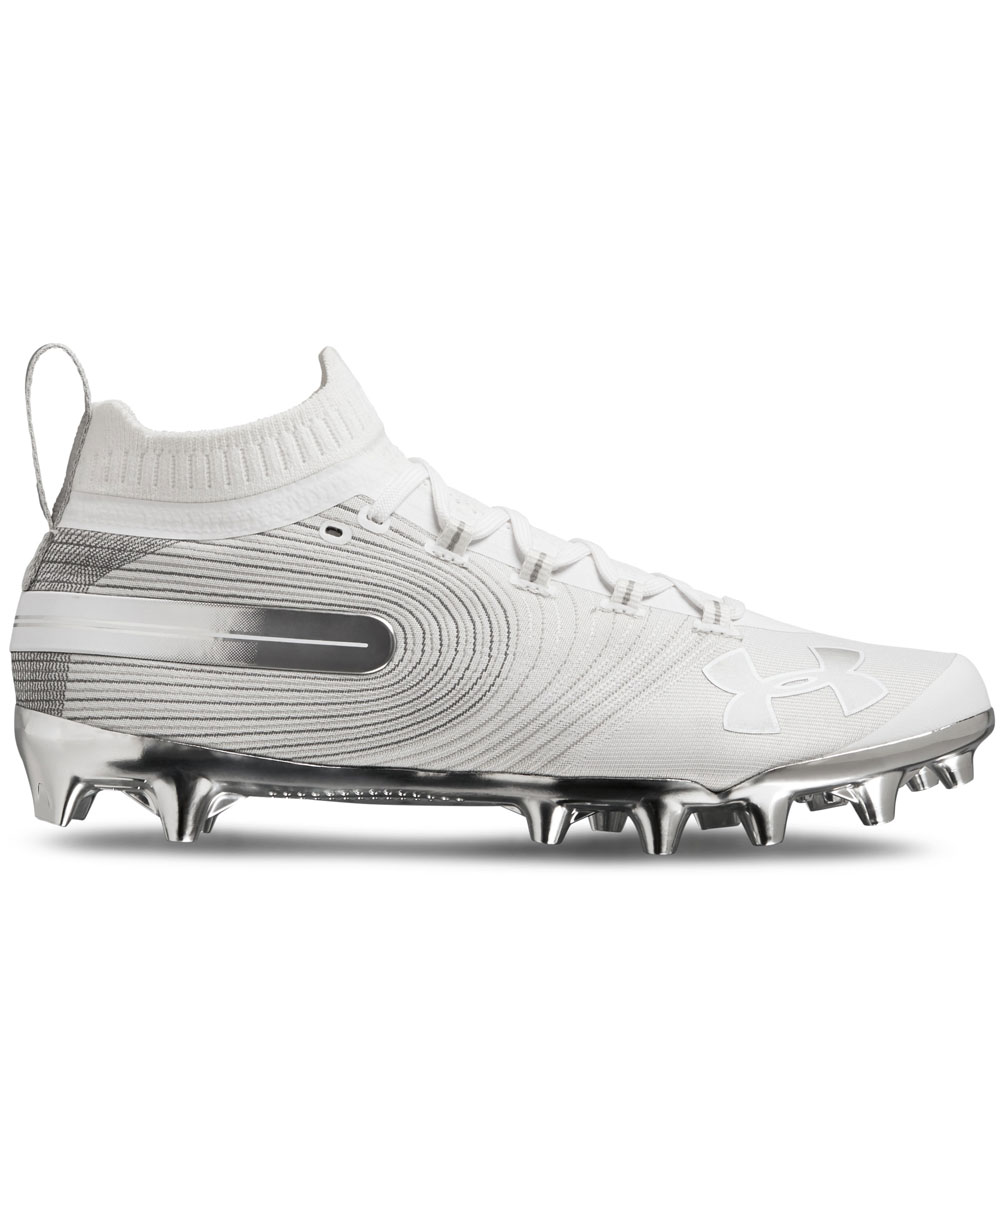 white under armour highlight cleats